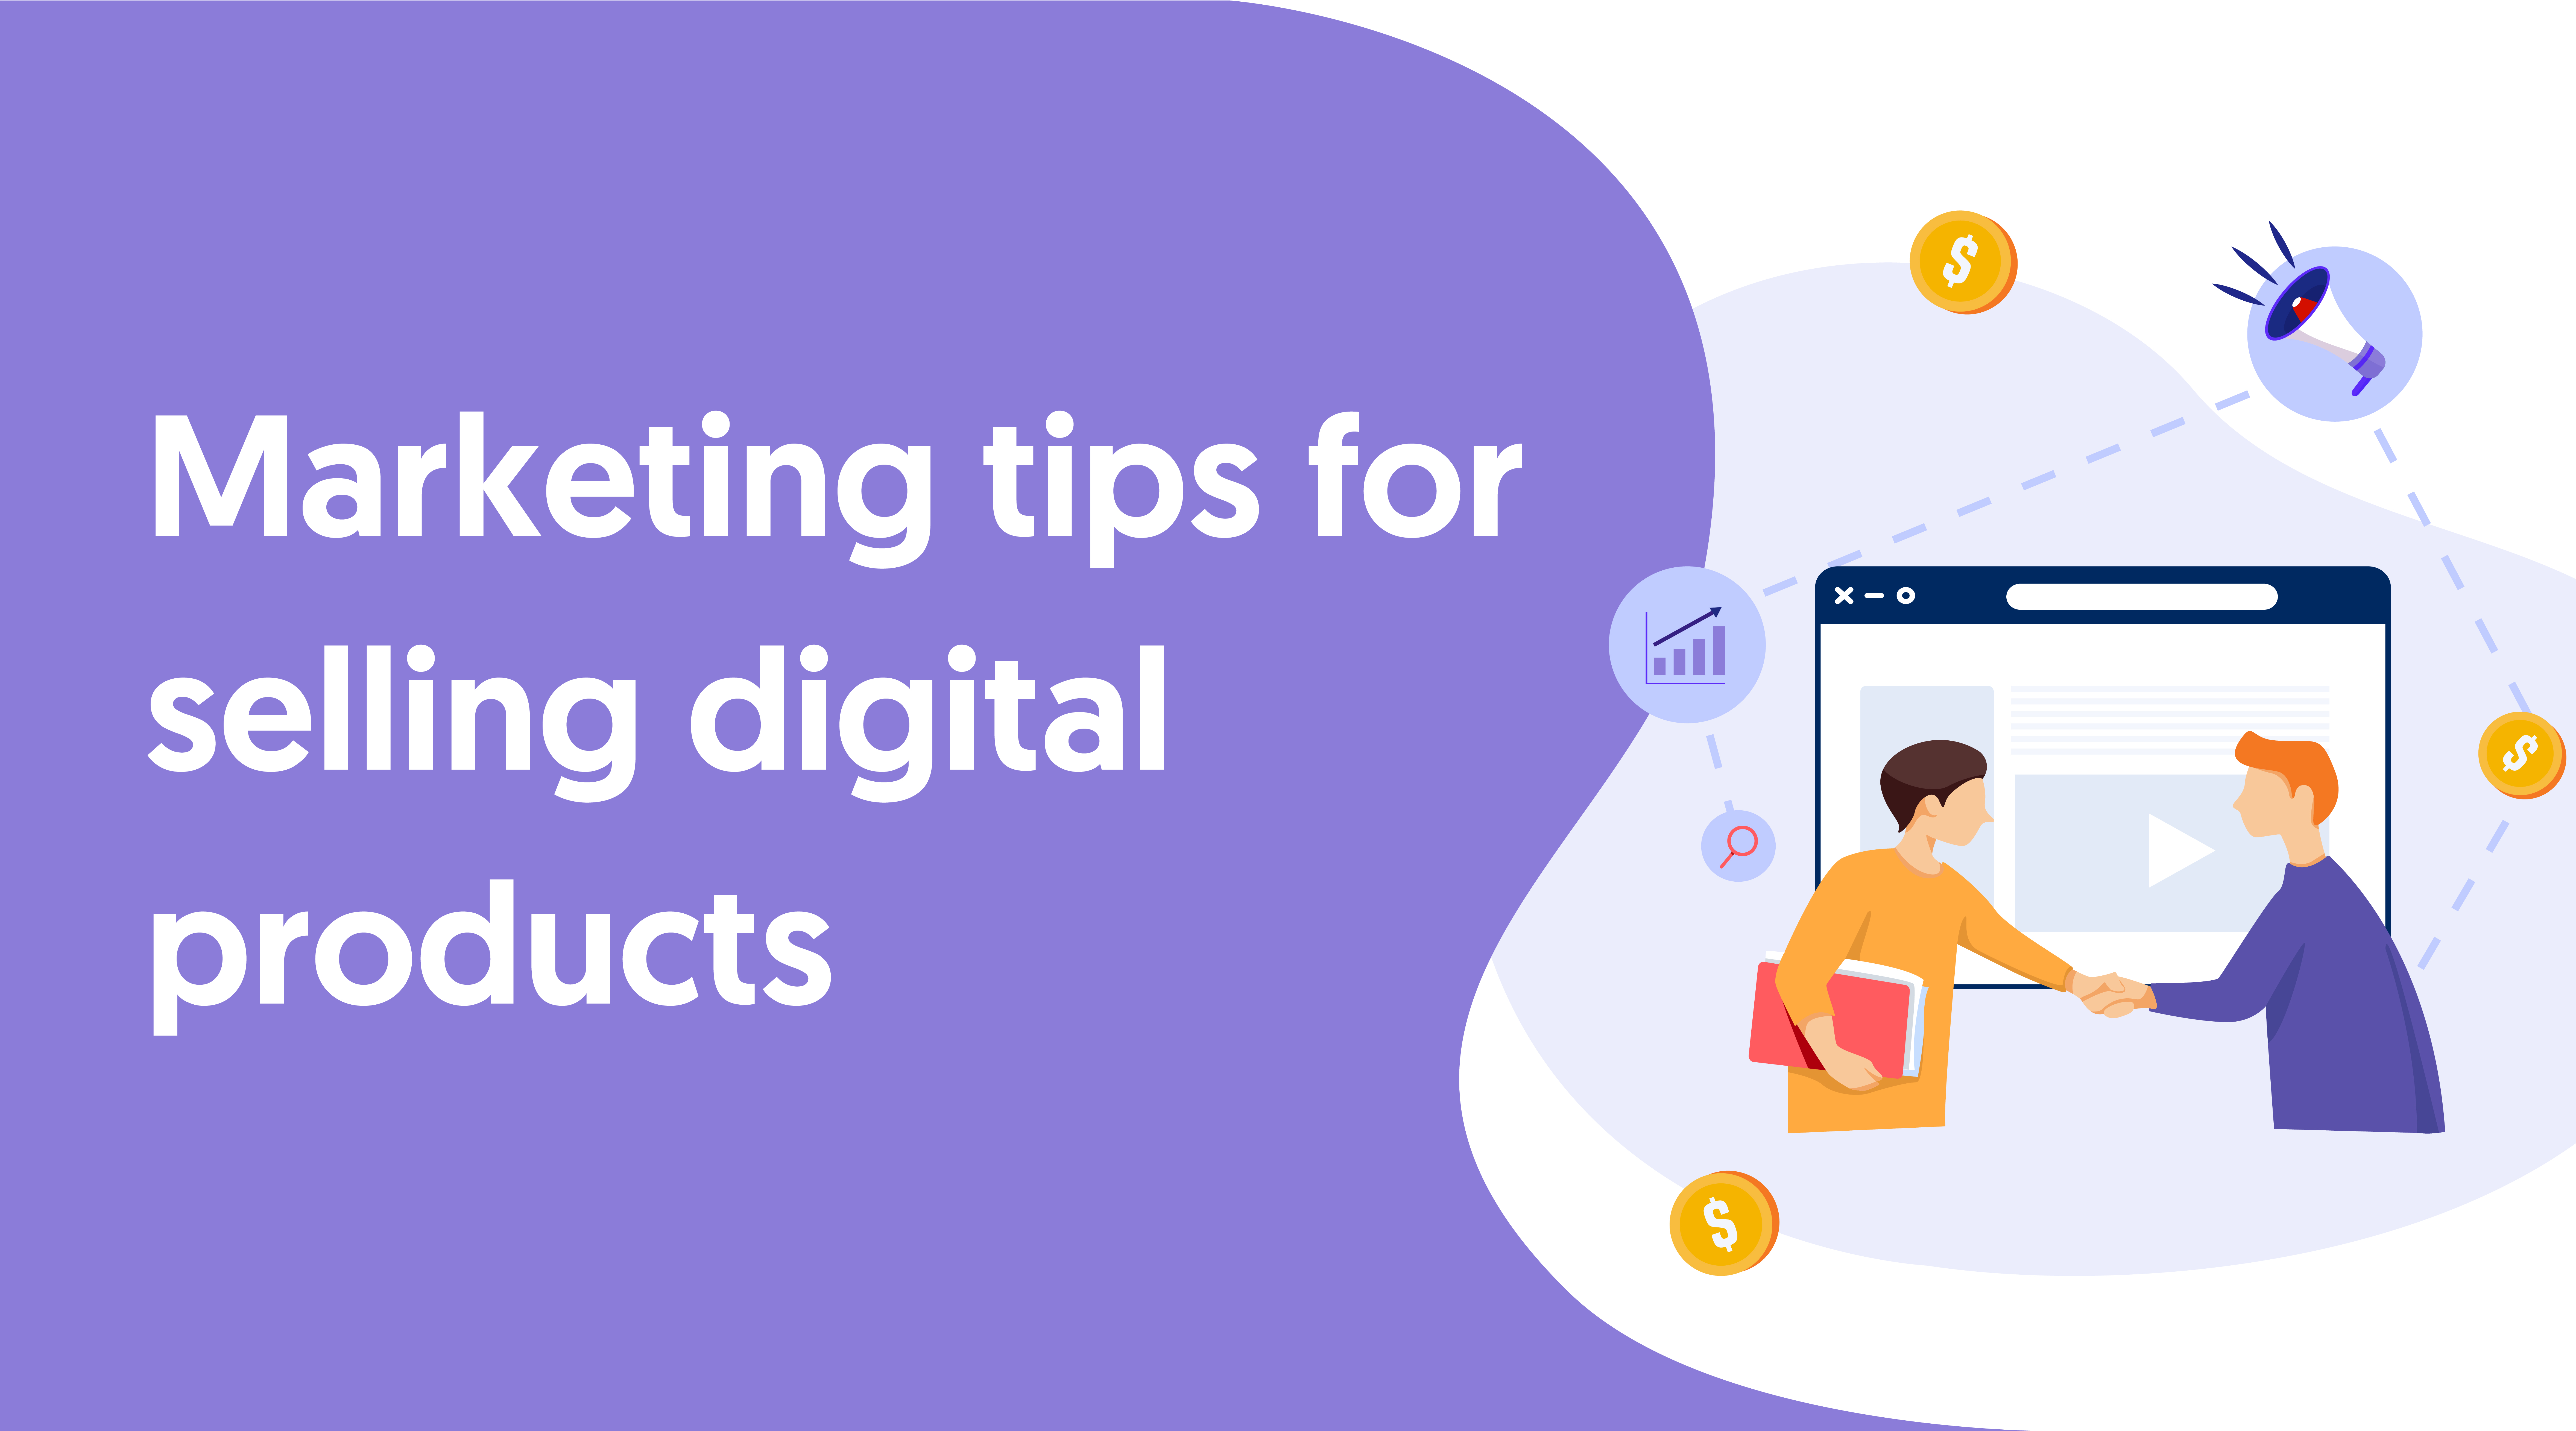 Marketing tips for selling digital products